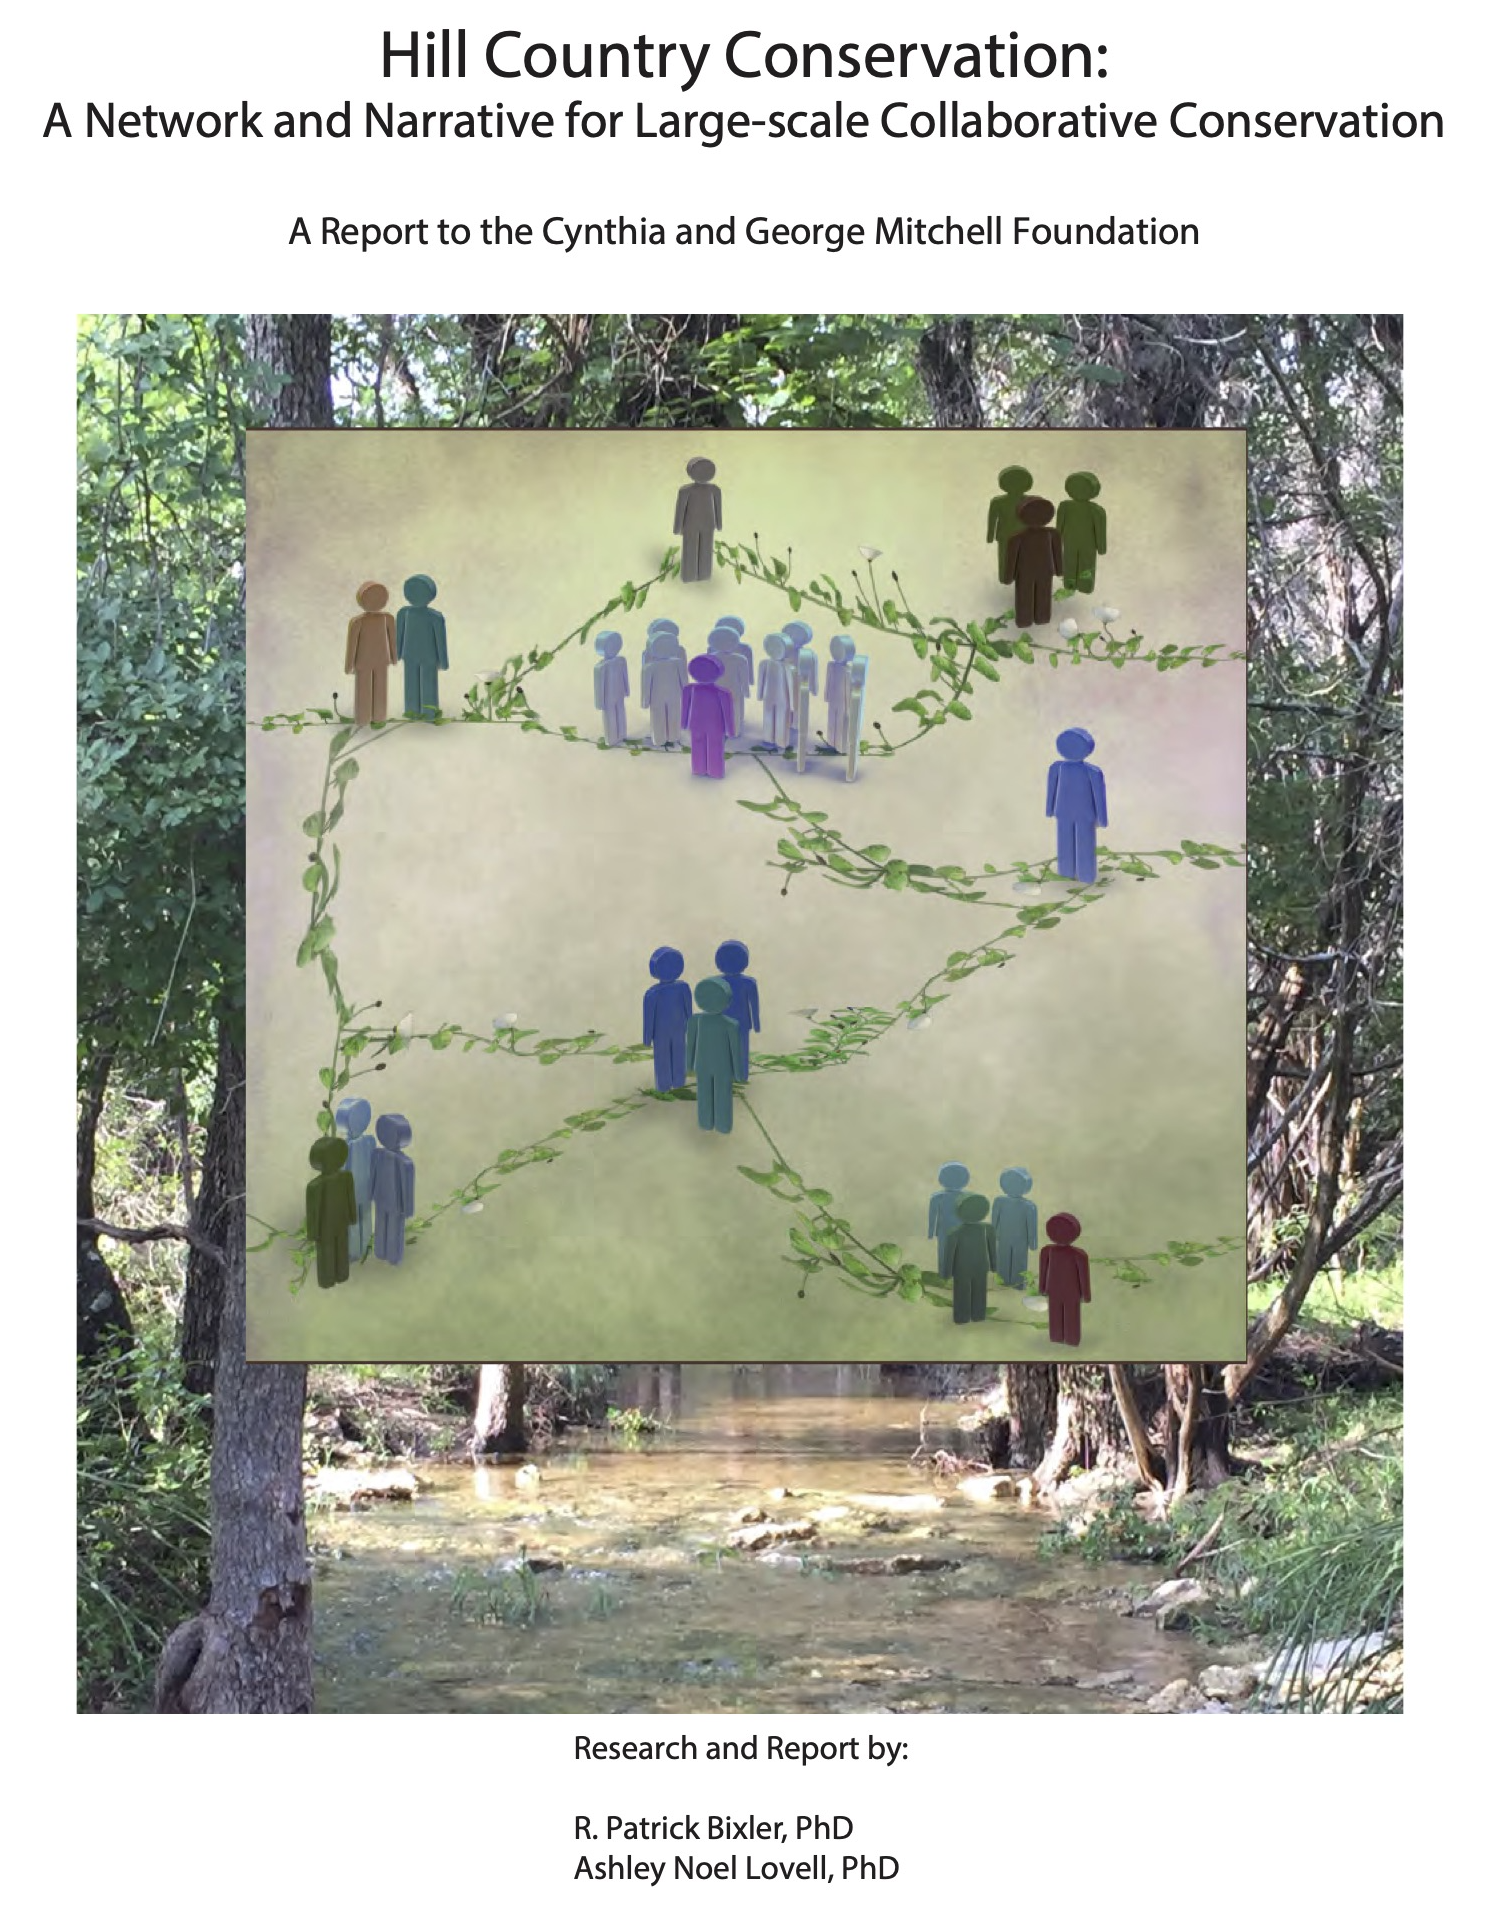 Report cover for the 2016 Network Report - "Hill Country Conservation: Identifying a Narrative and Network for Large-scale Collaborative Conservation"